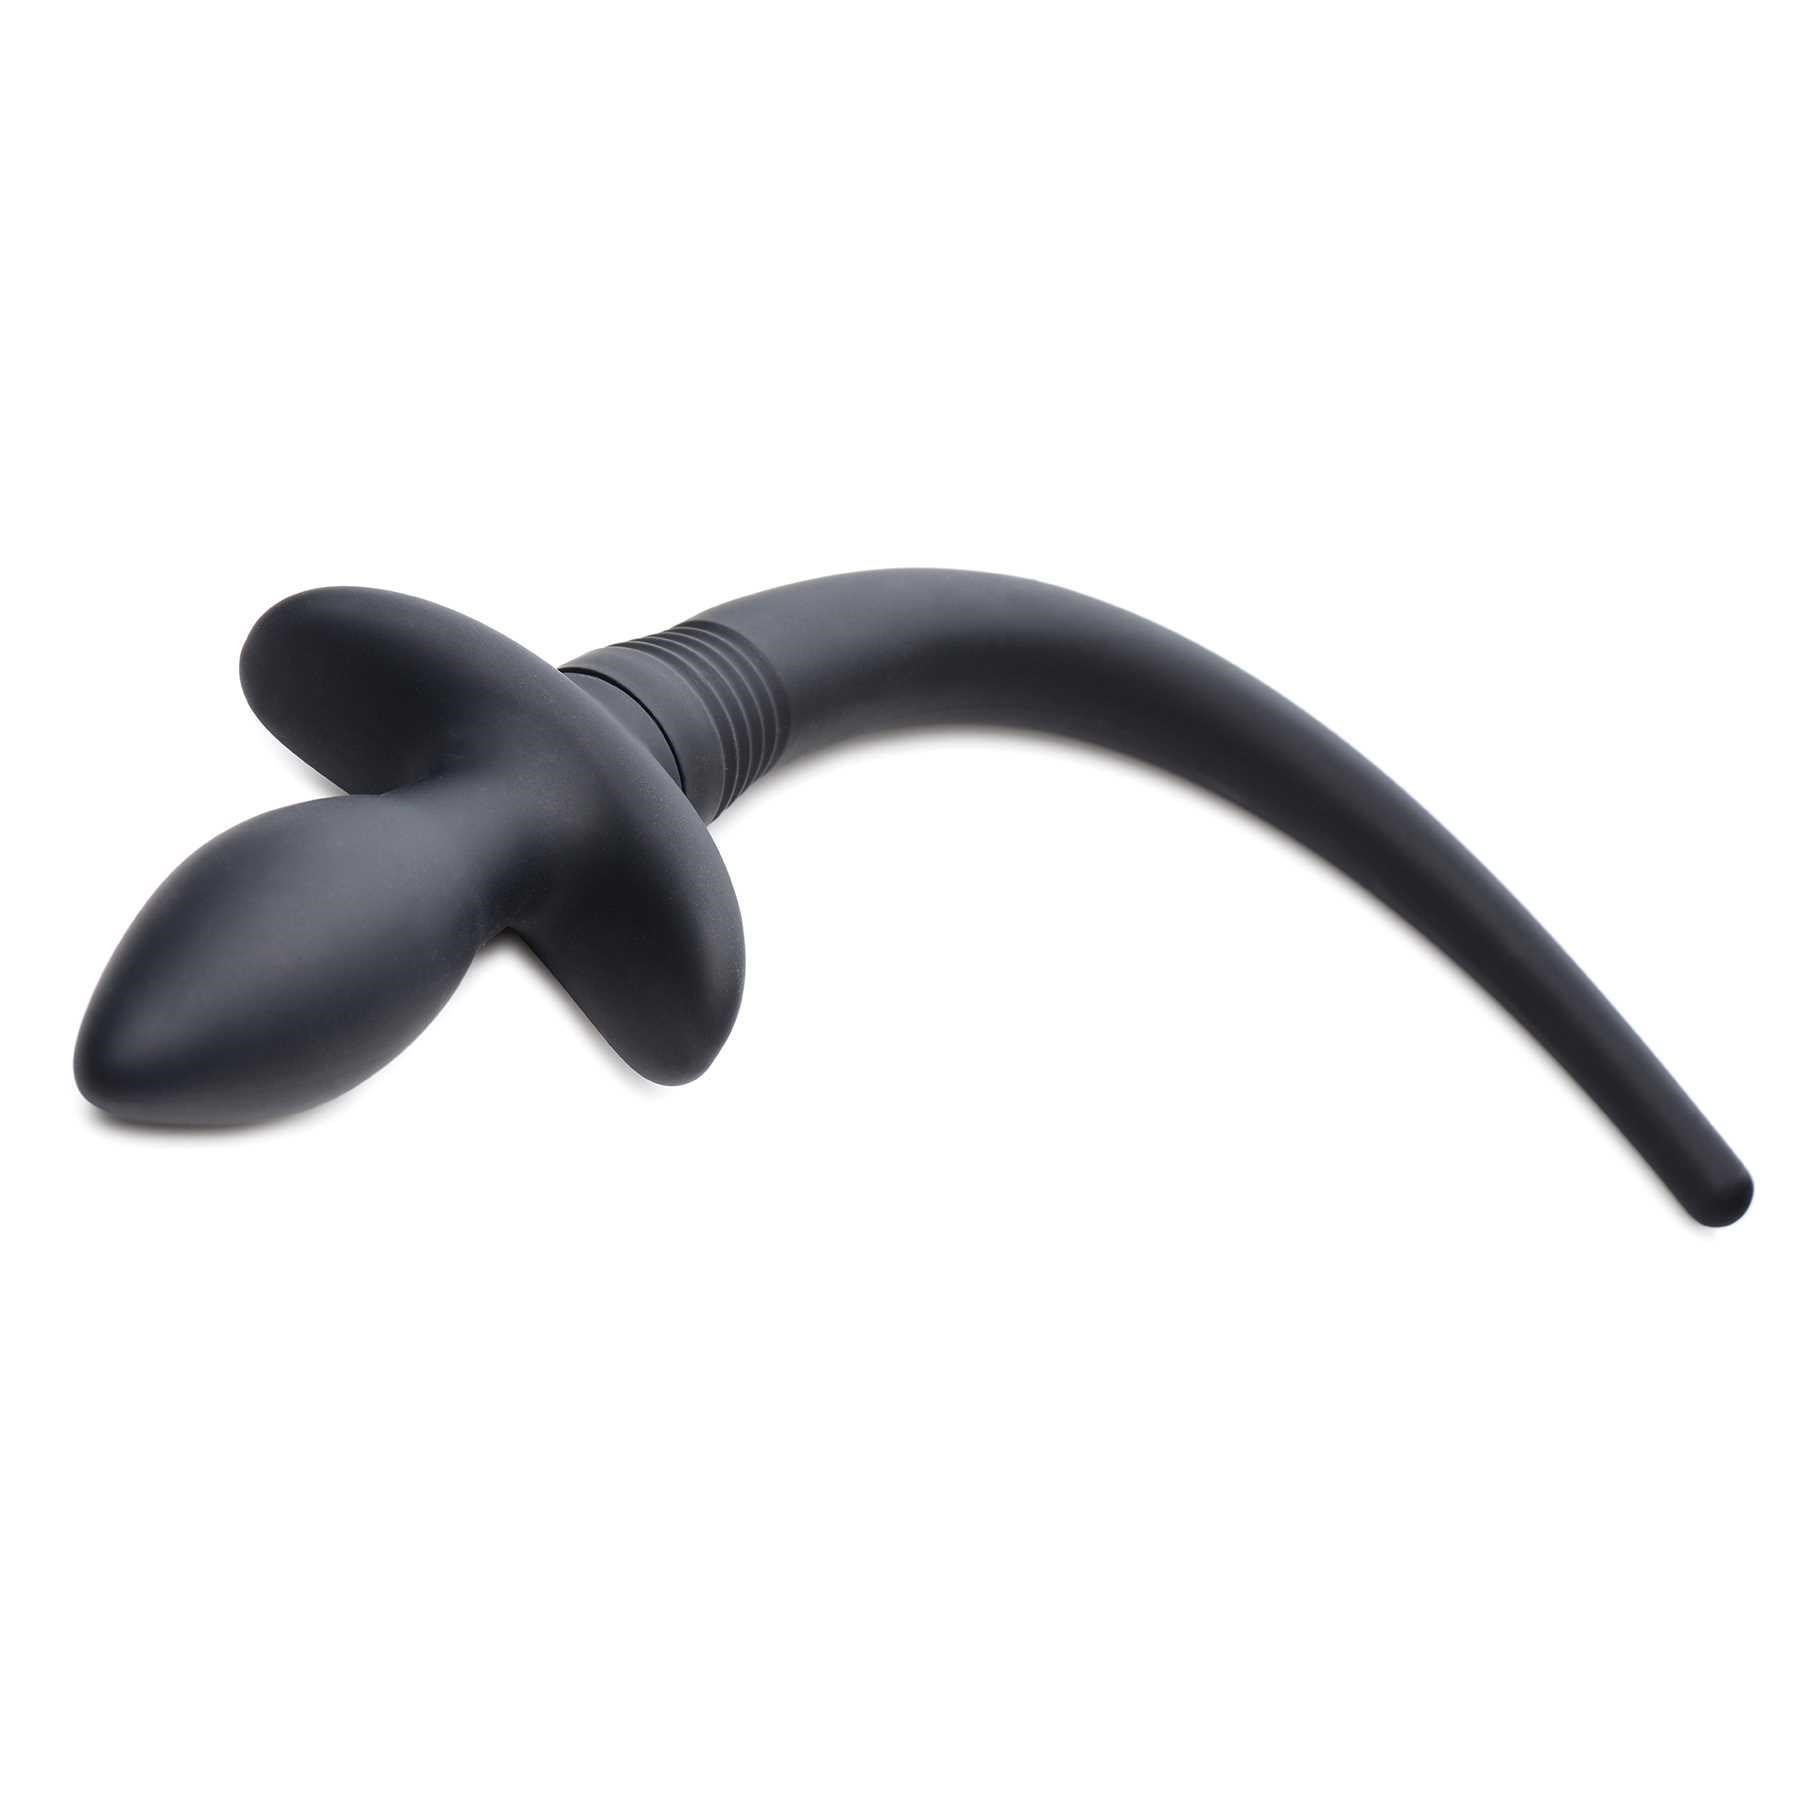 Wagging & Vibrating Puppy Tail Anal Plug left facing view